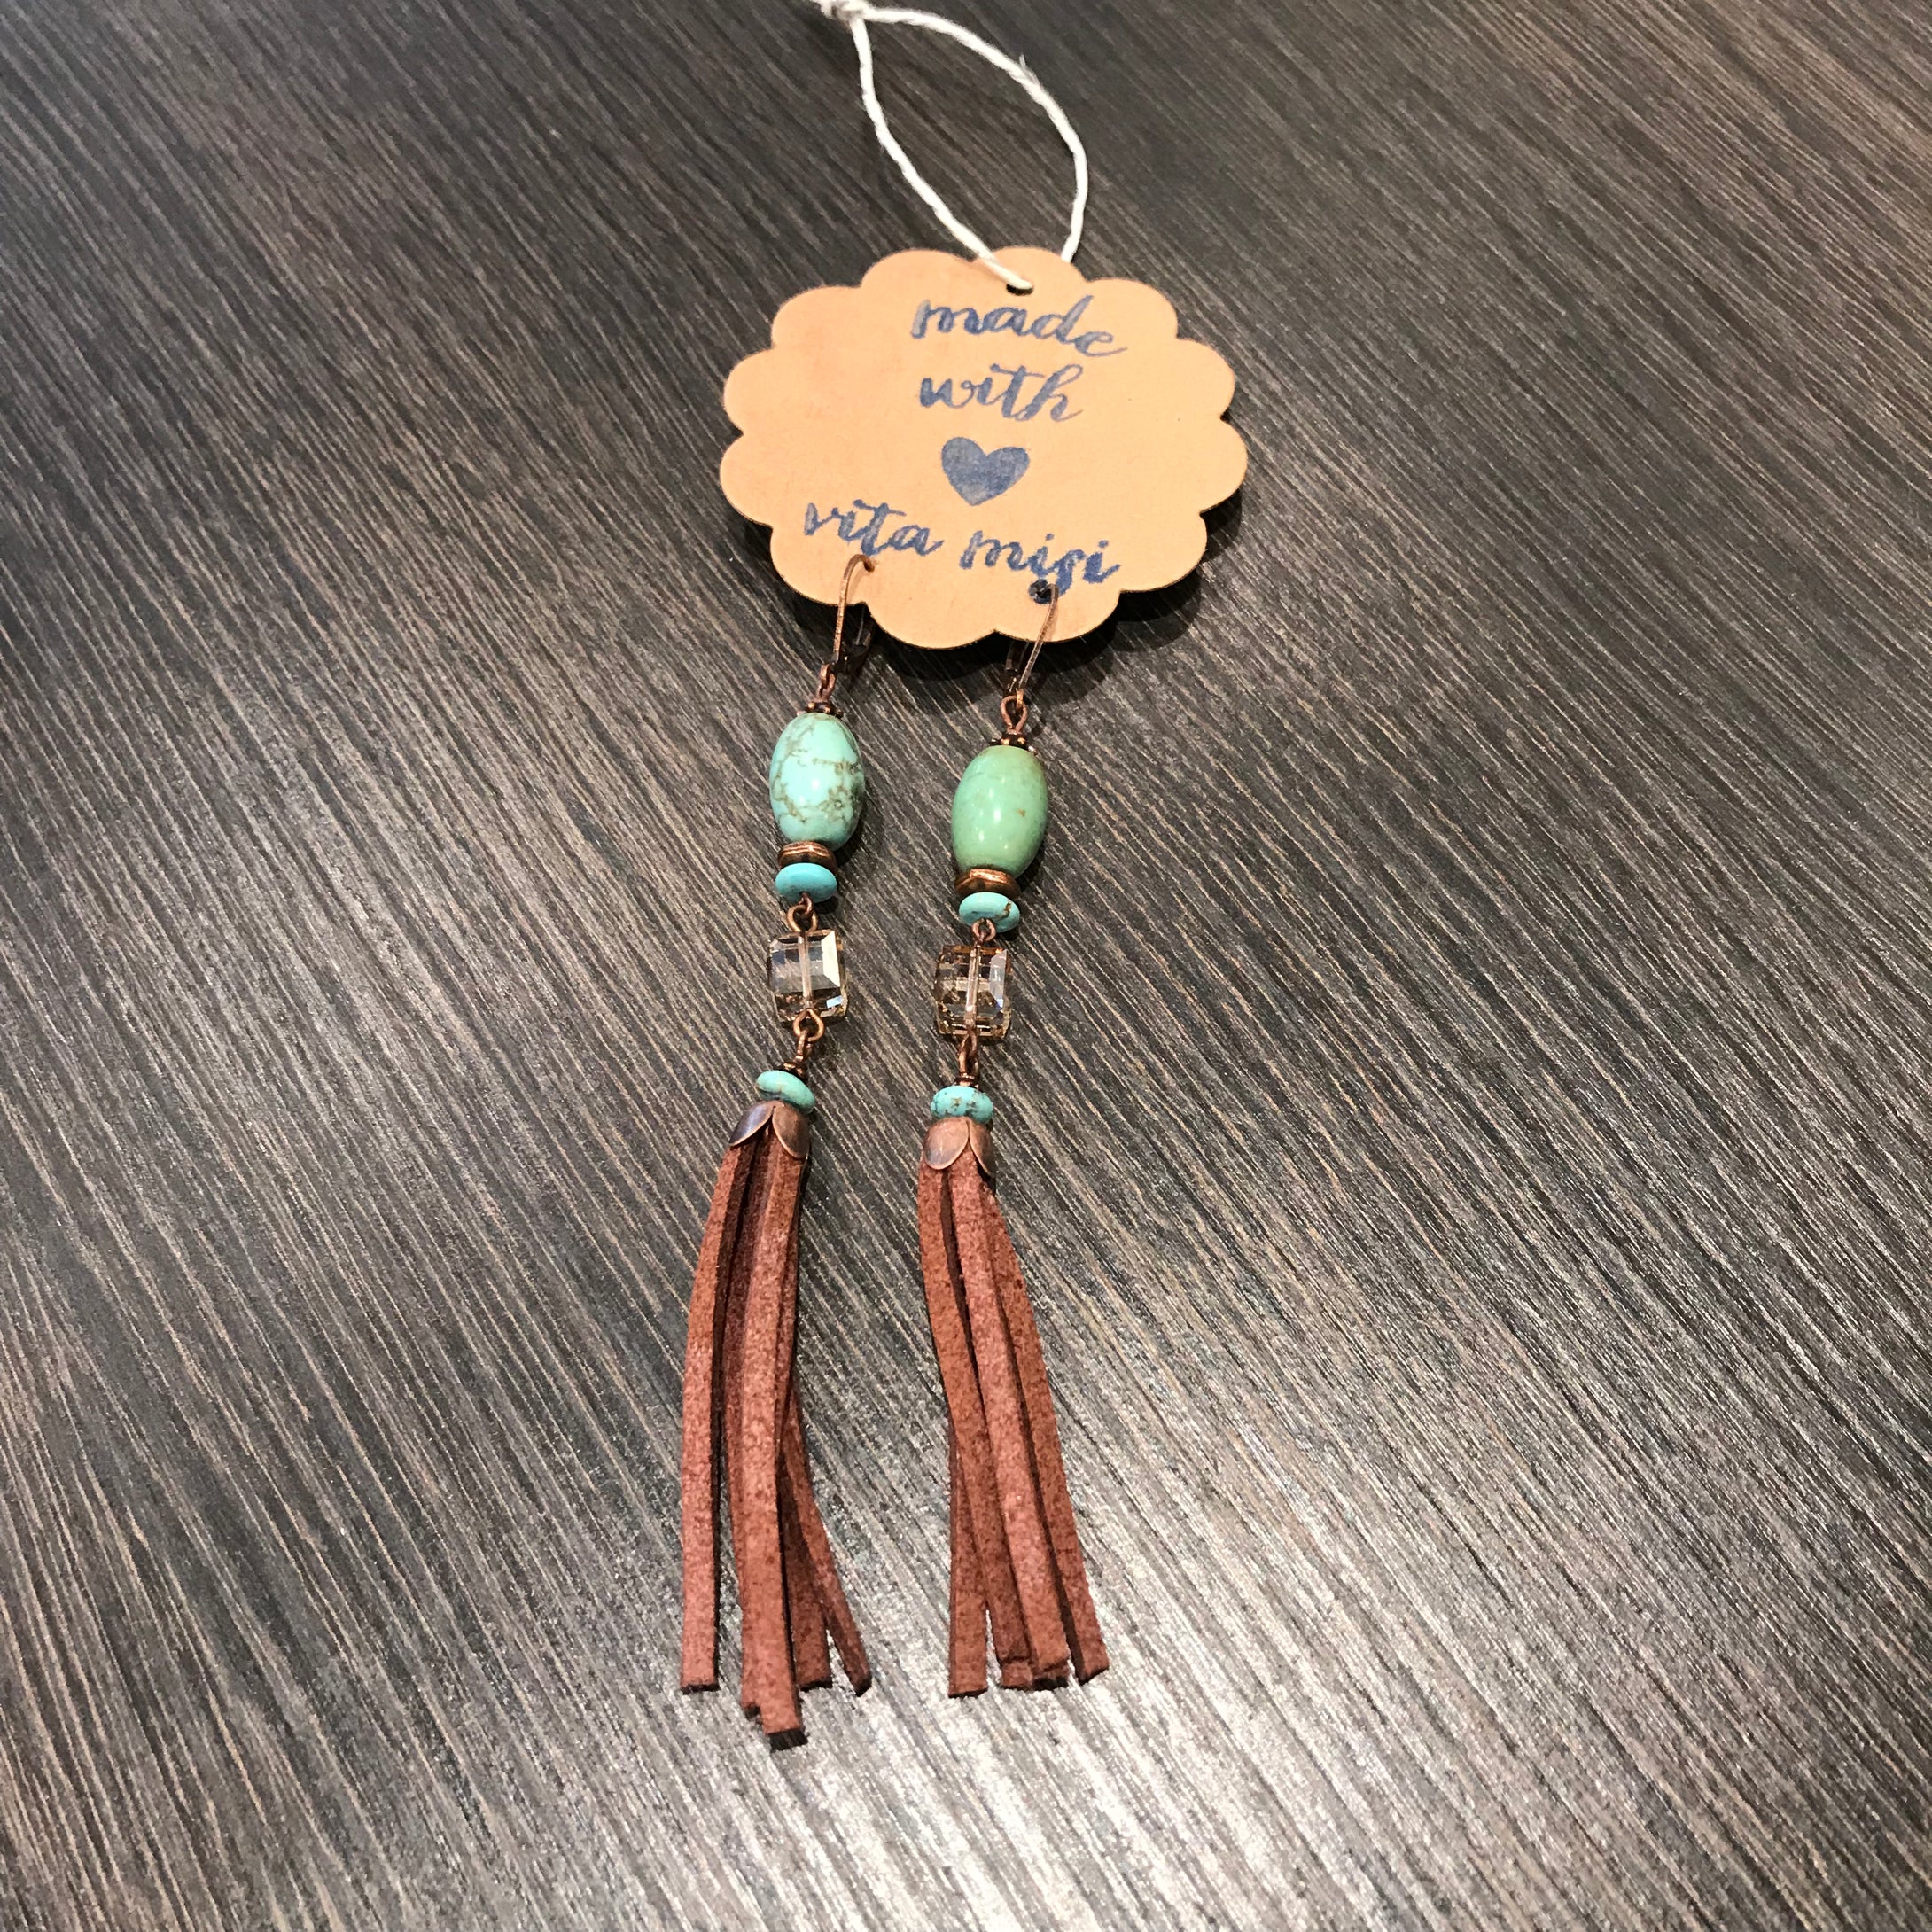 Hand made Earrings with Turquoise and Leather